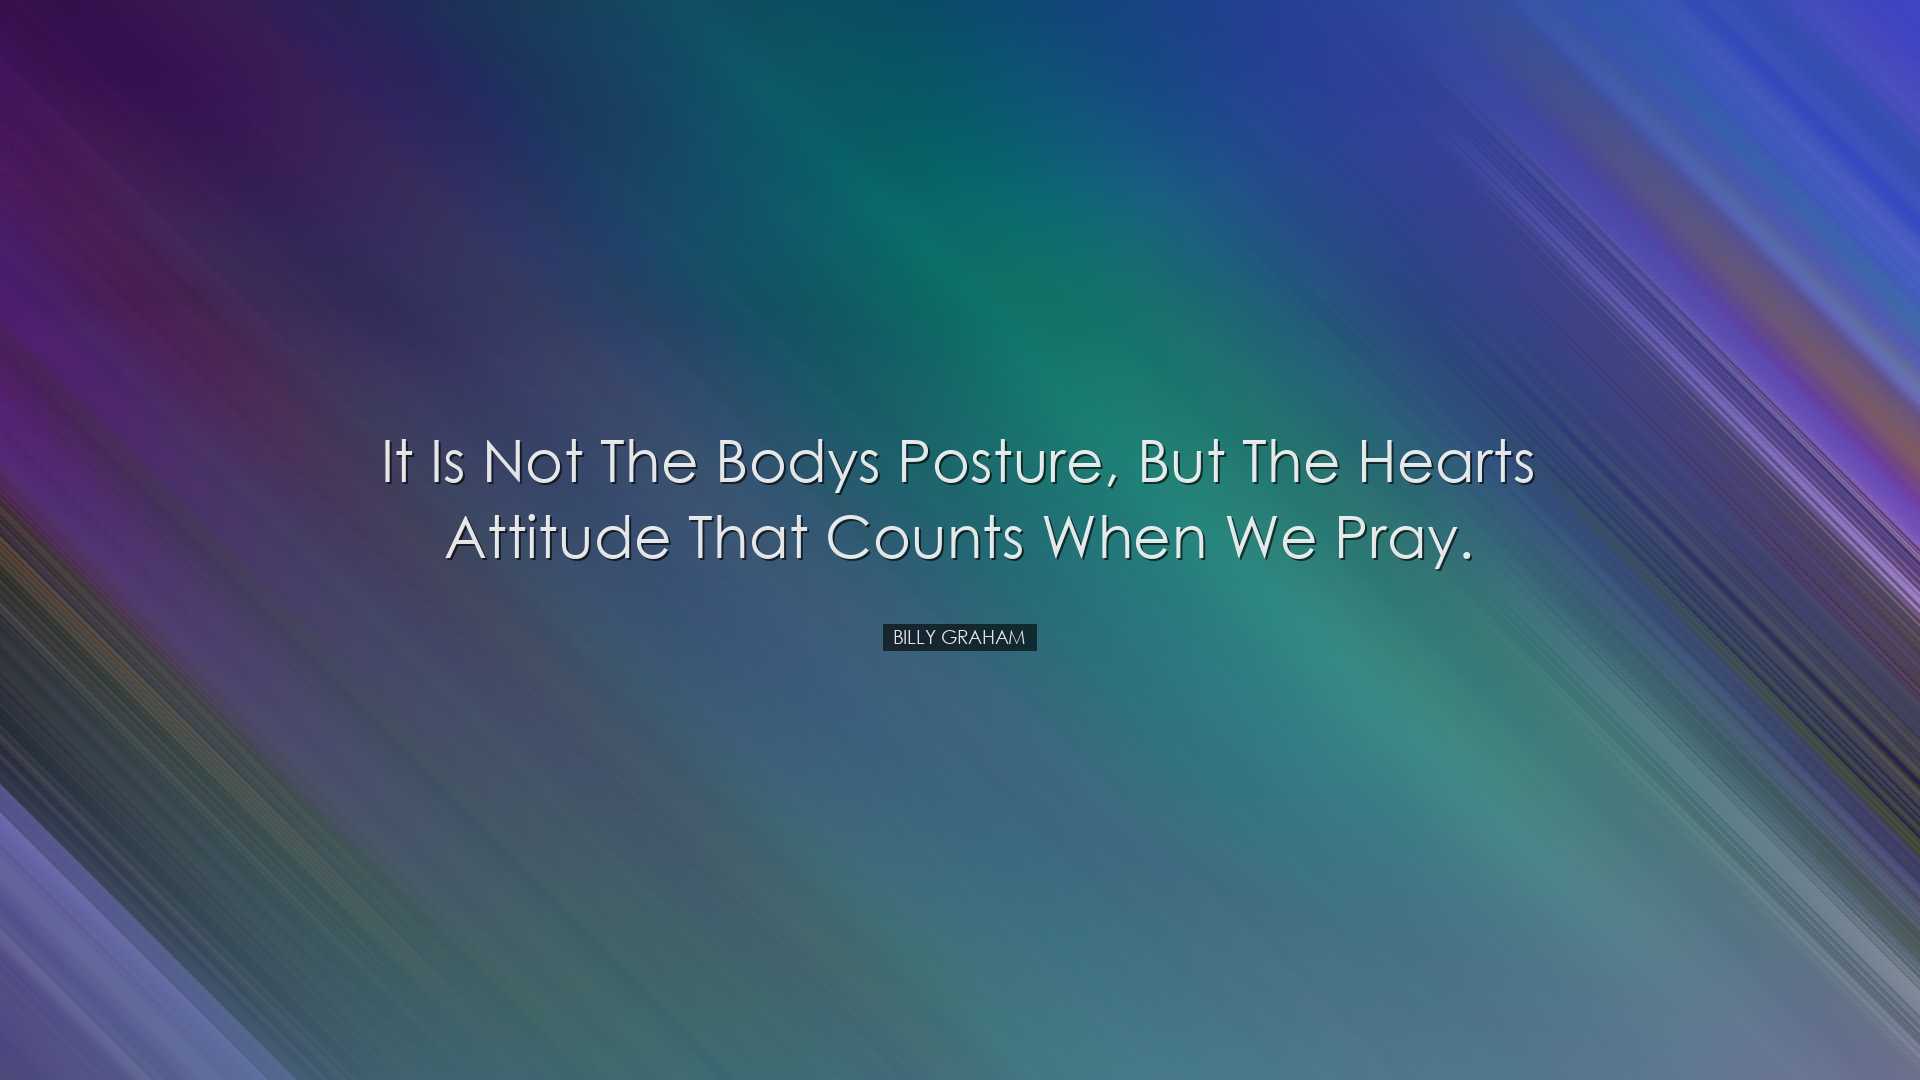 It is not the bodys posture, but the hearts attitude that counts w